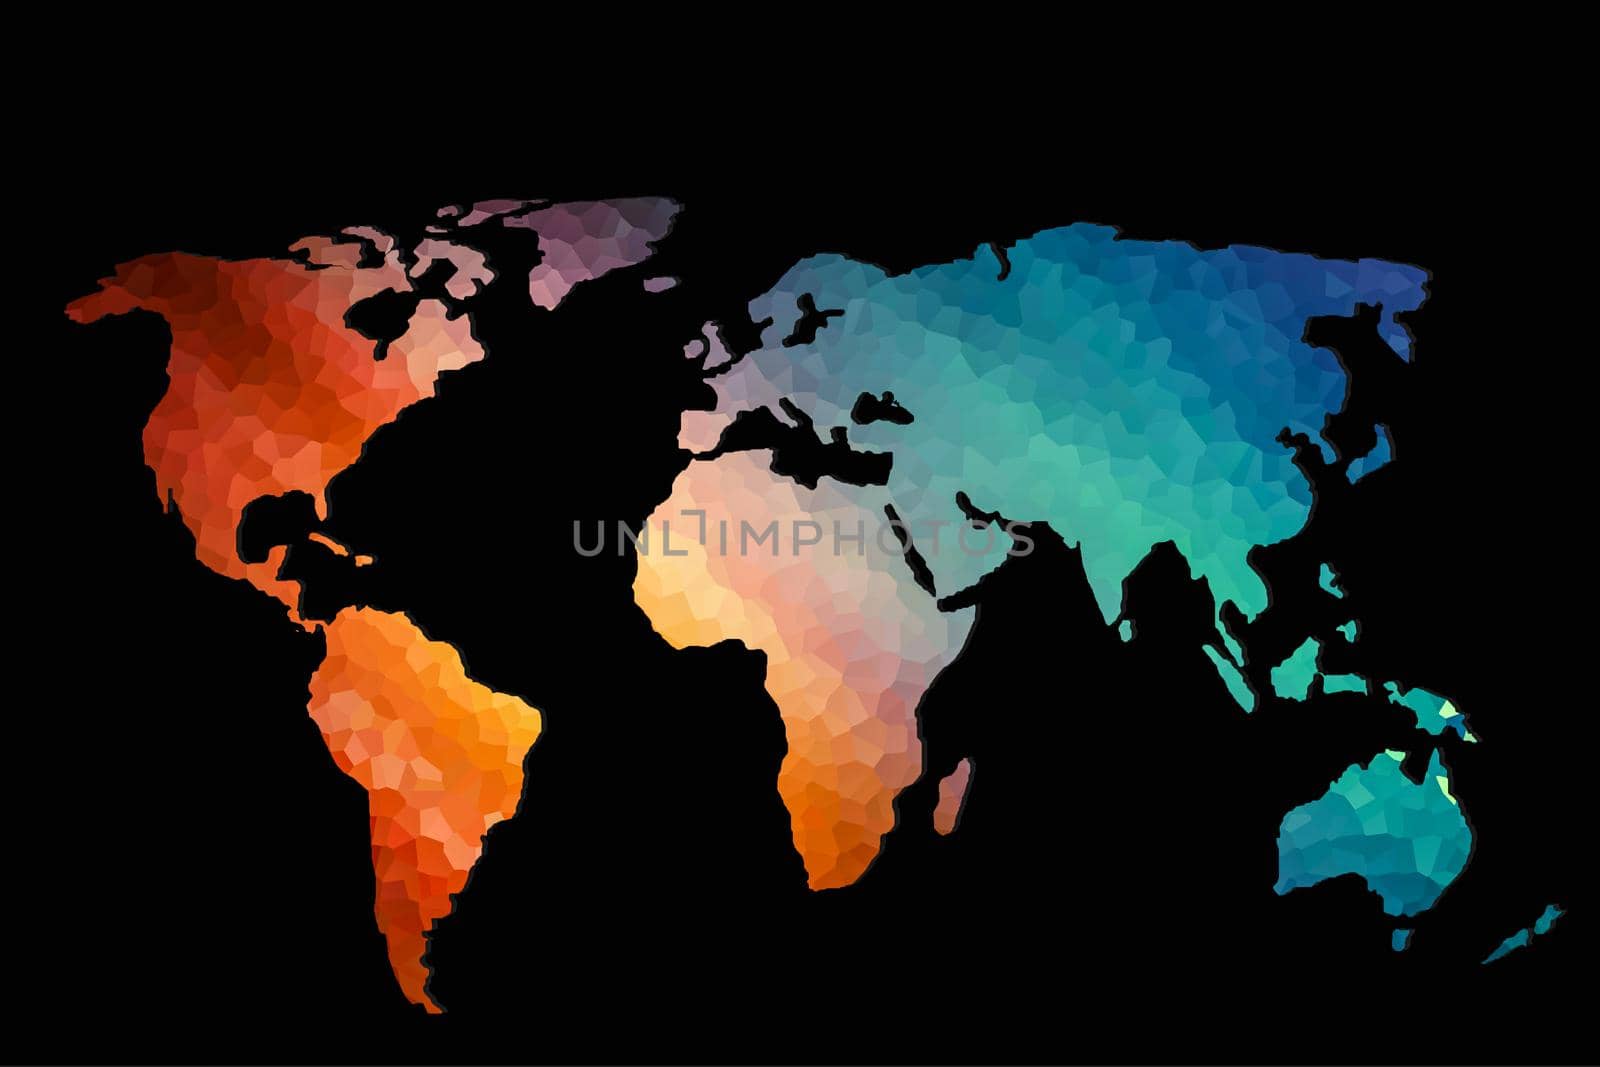 Roughly sketched out world map as global business concepts by berkay